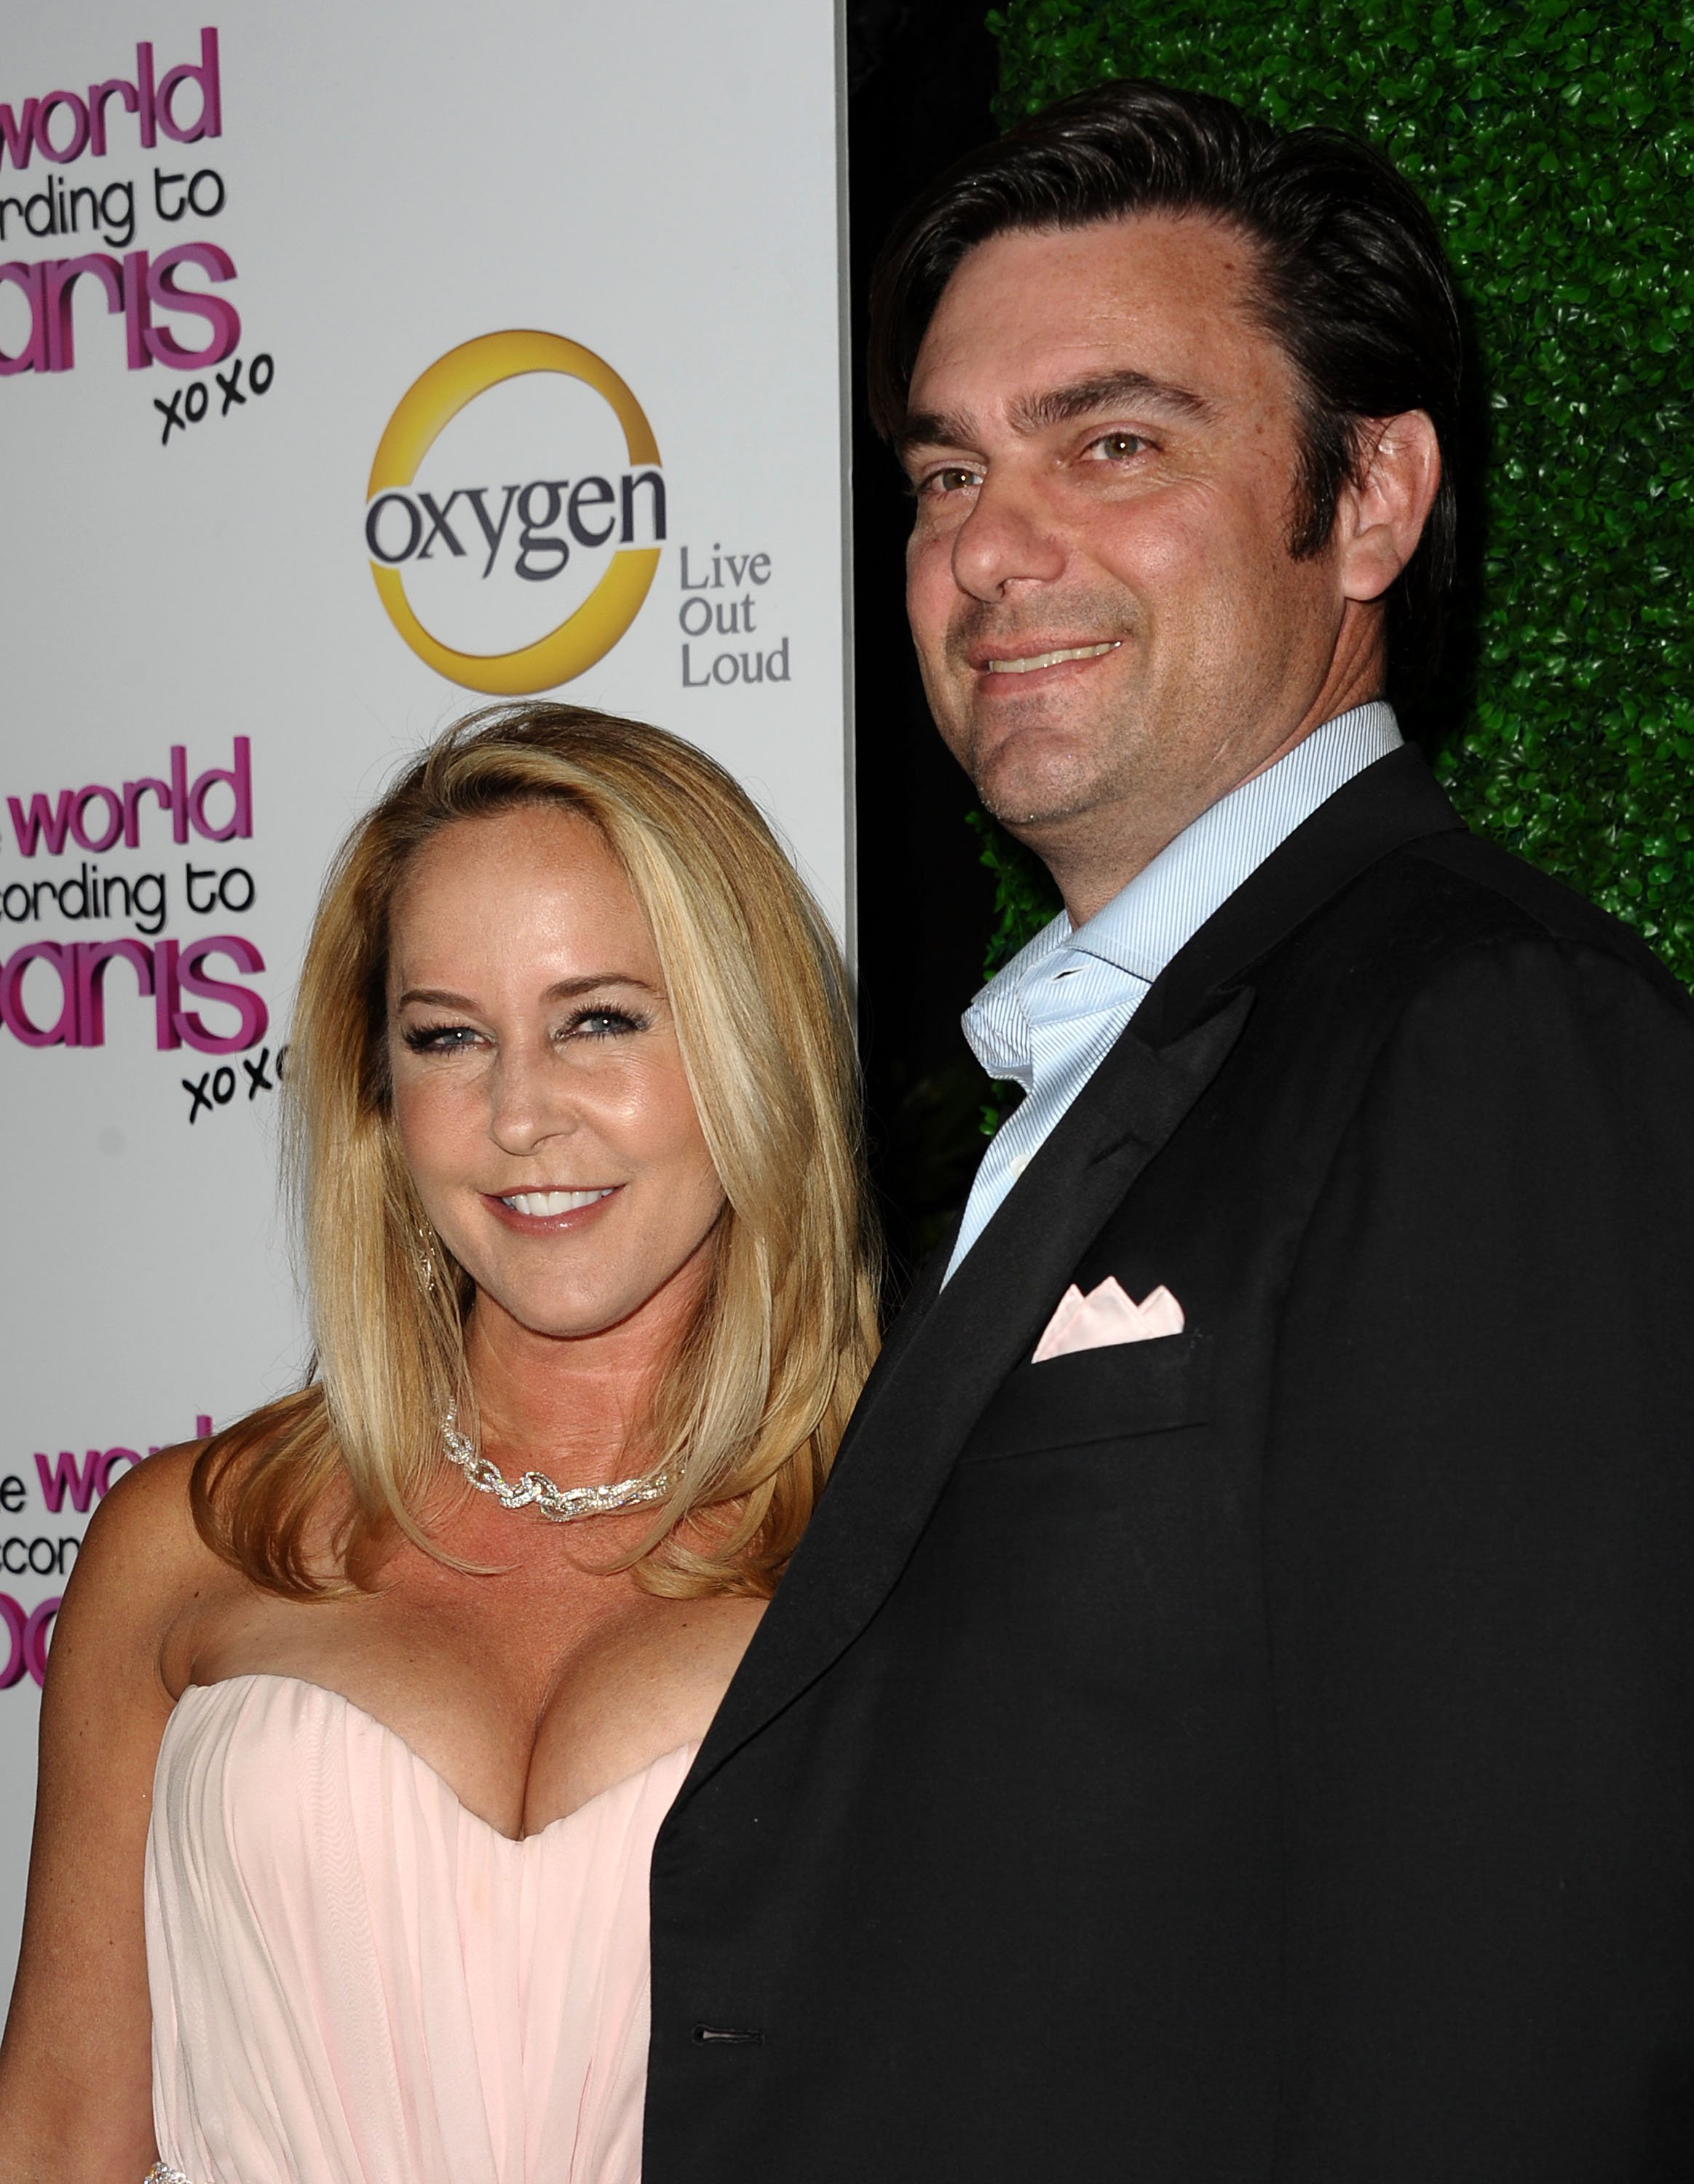 Erin Murphy and her husband Darren Dunckel during Oxygen's "The World According To Paris" premiere party at Tropicana Bar at The Hollywood Rooselvelt Hotel on May 17, 2011 in Hollywood, California. / Source: Getty Images